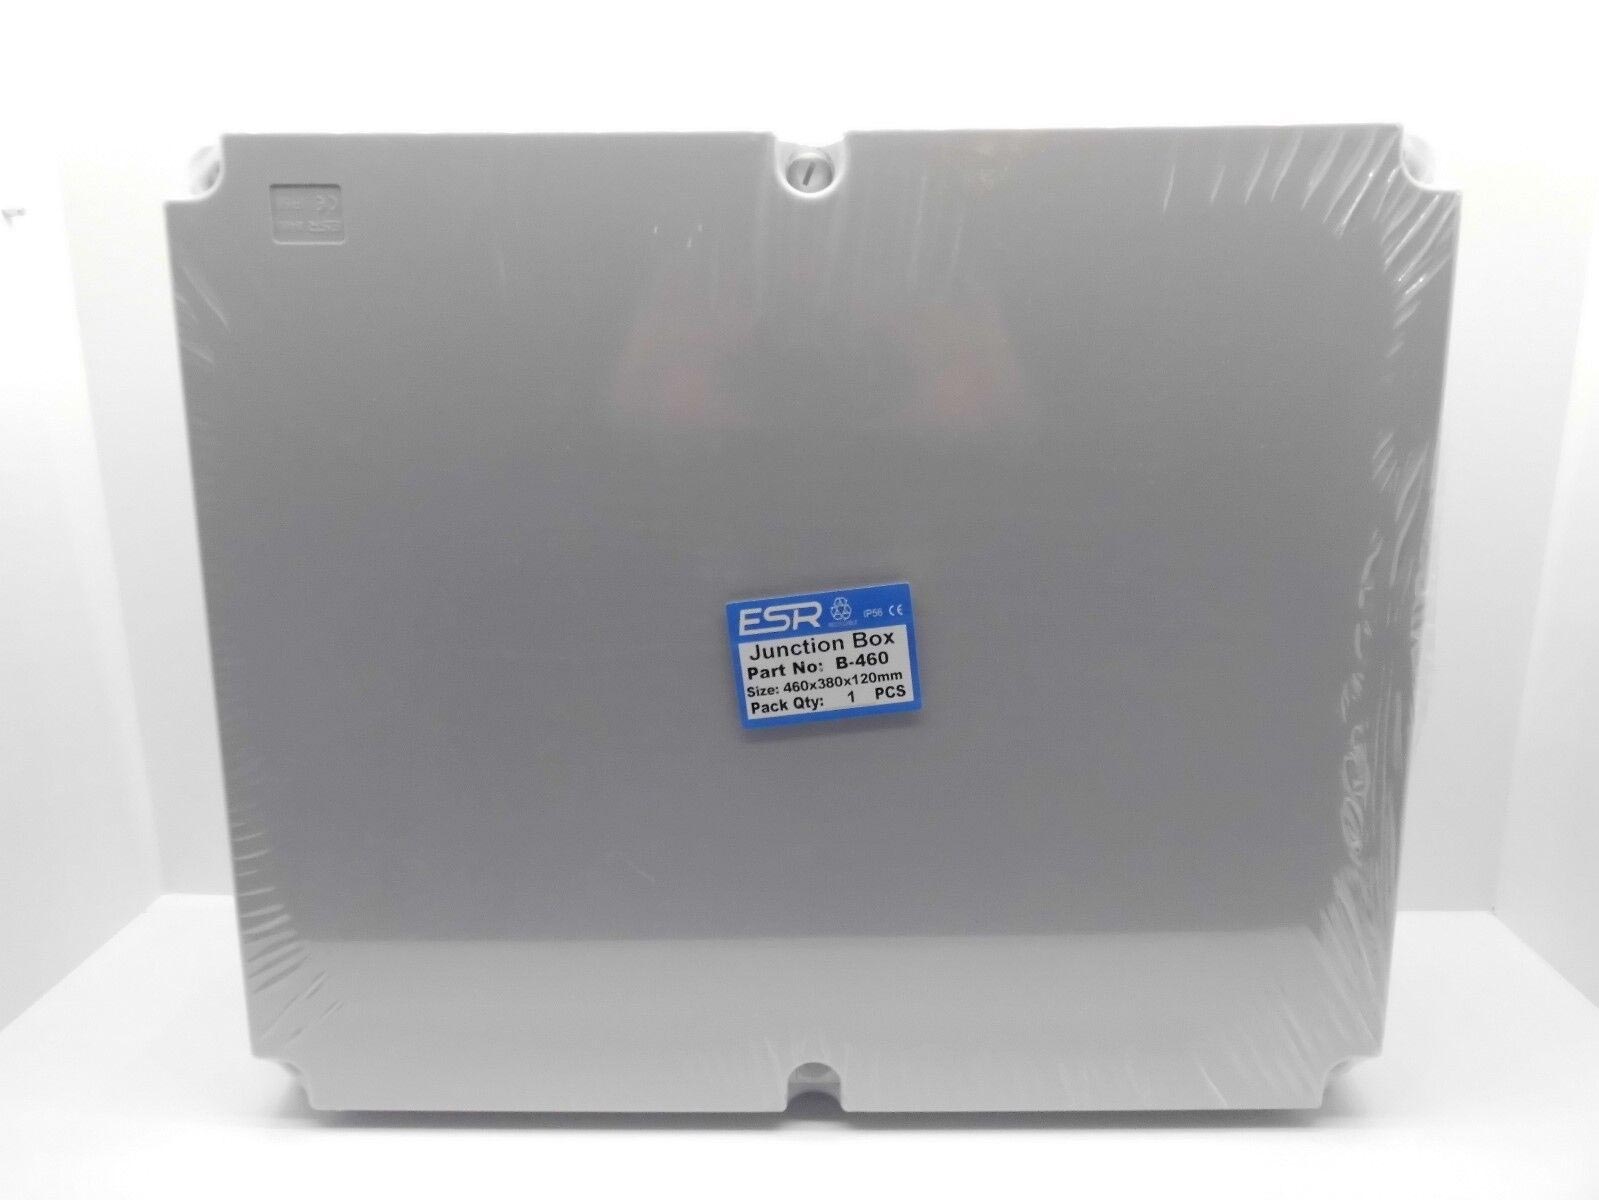 ESR B460 460mm x 380mm x 120mm Extra Large Junction Box Plastic PVC IP56 Weatherproof Waterproof Electrical Enclosure with Plain Sides & Hinge Indoor Outdoor